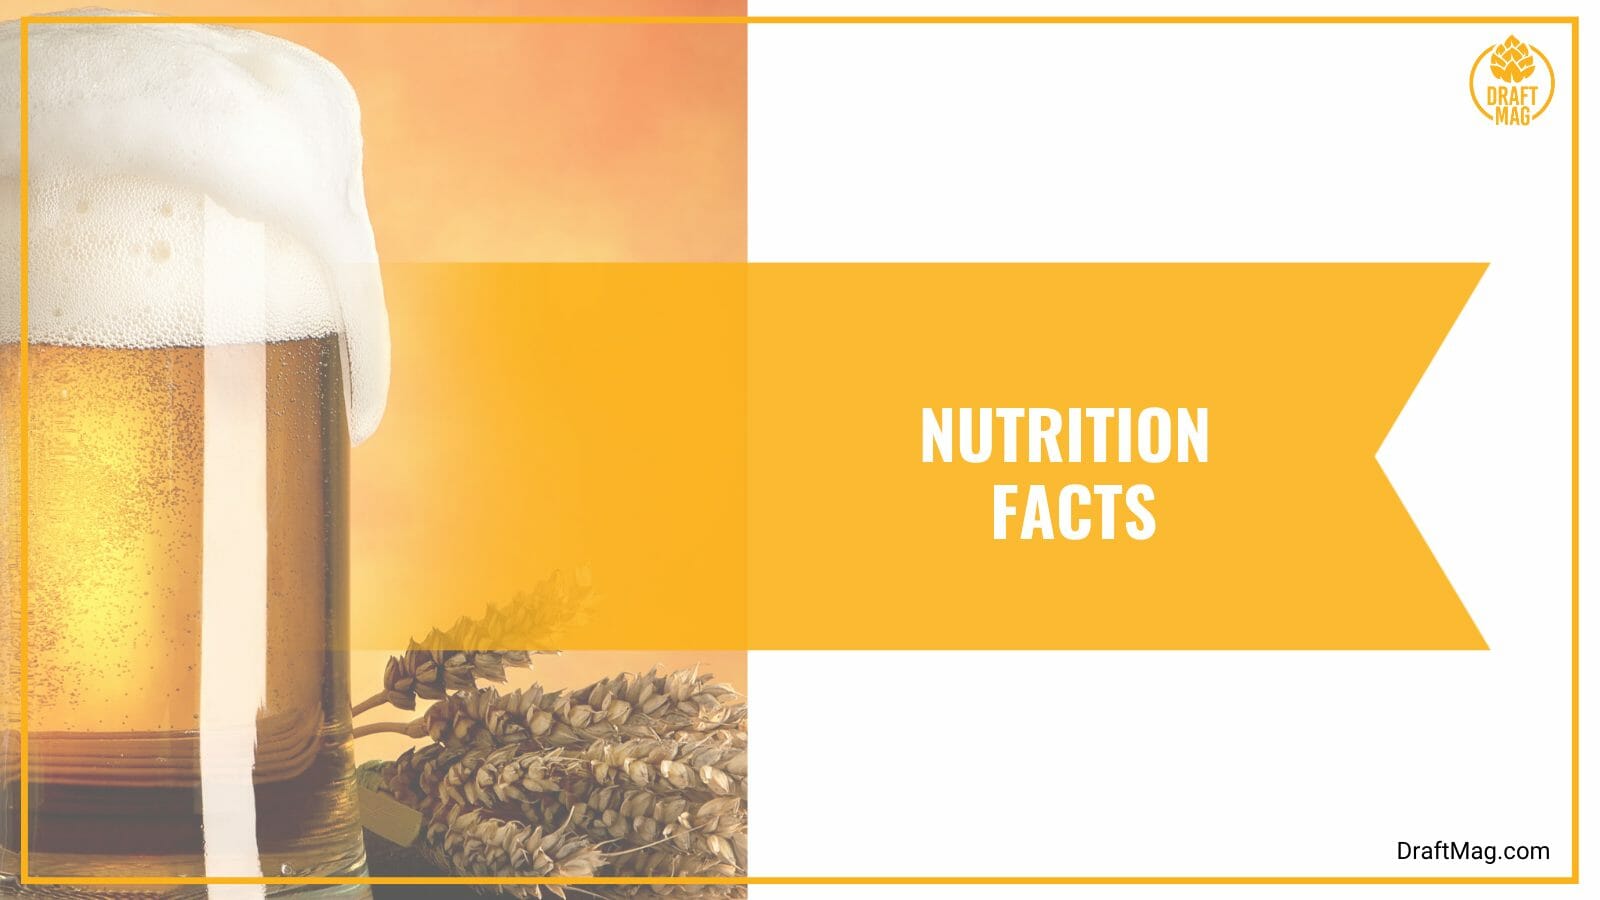 Values of nutrition for michelob lager beer